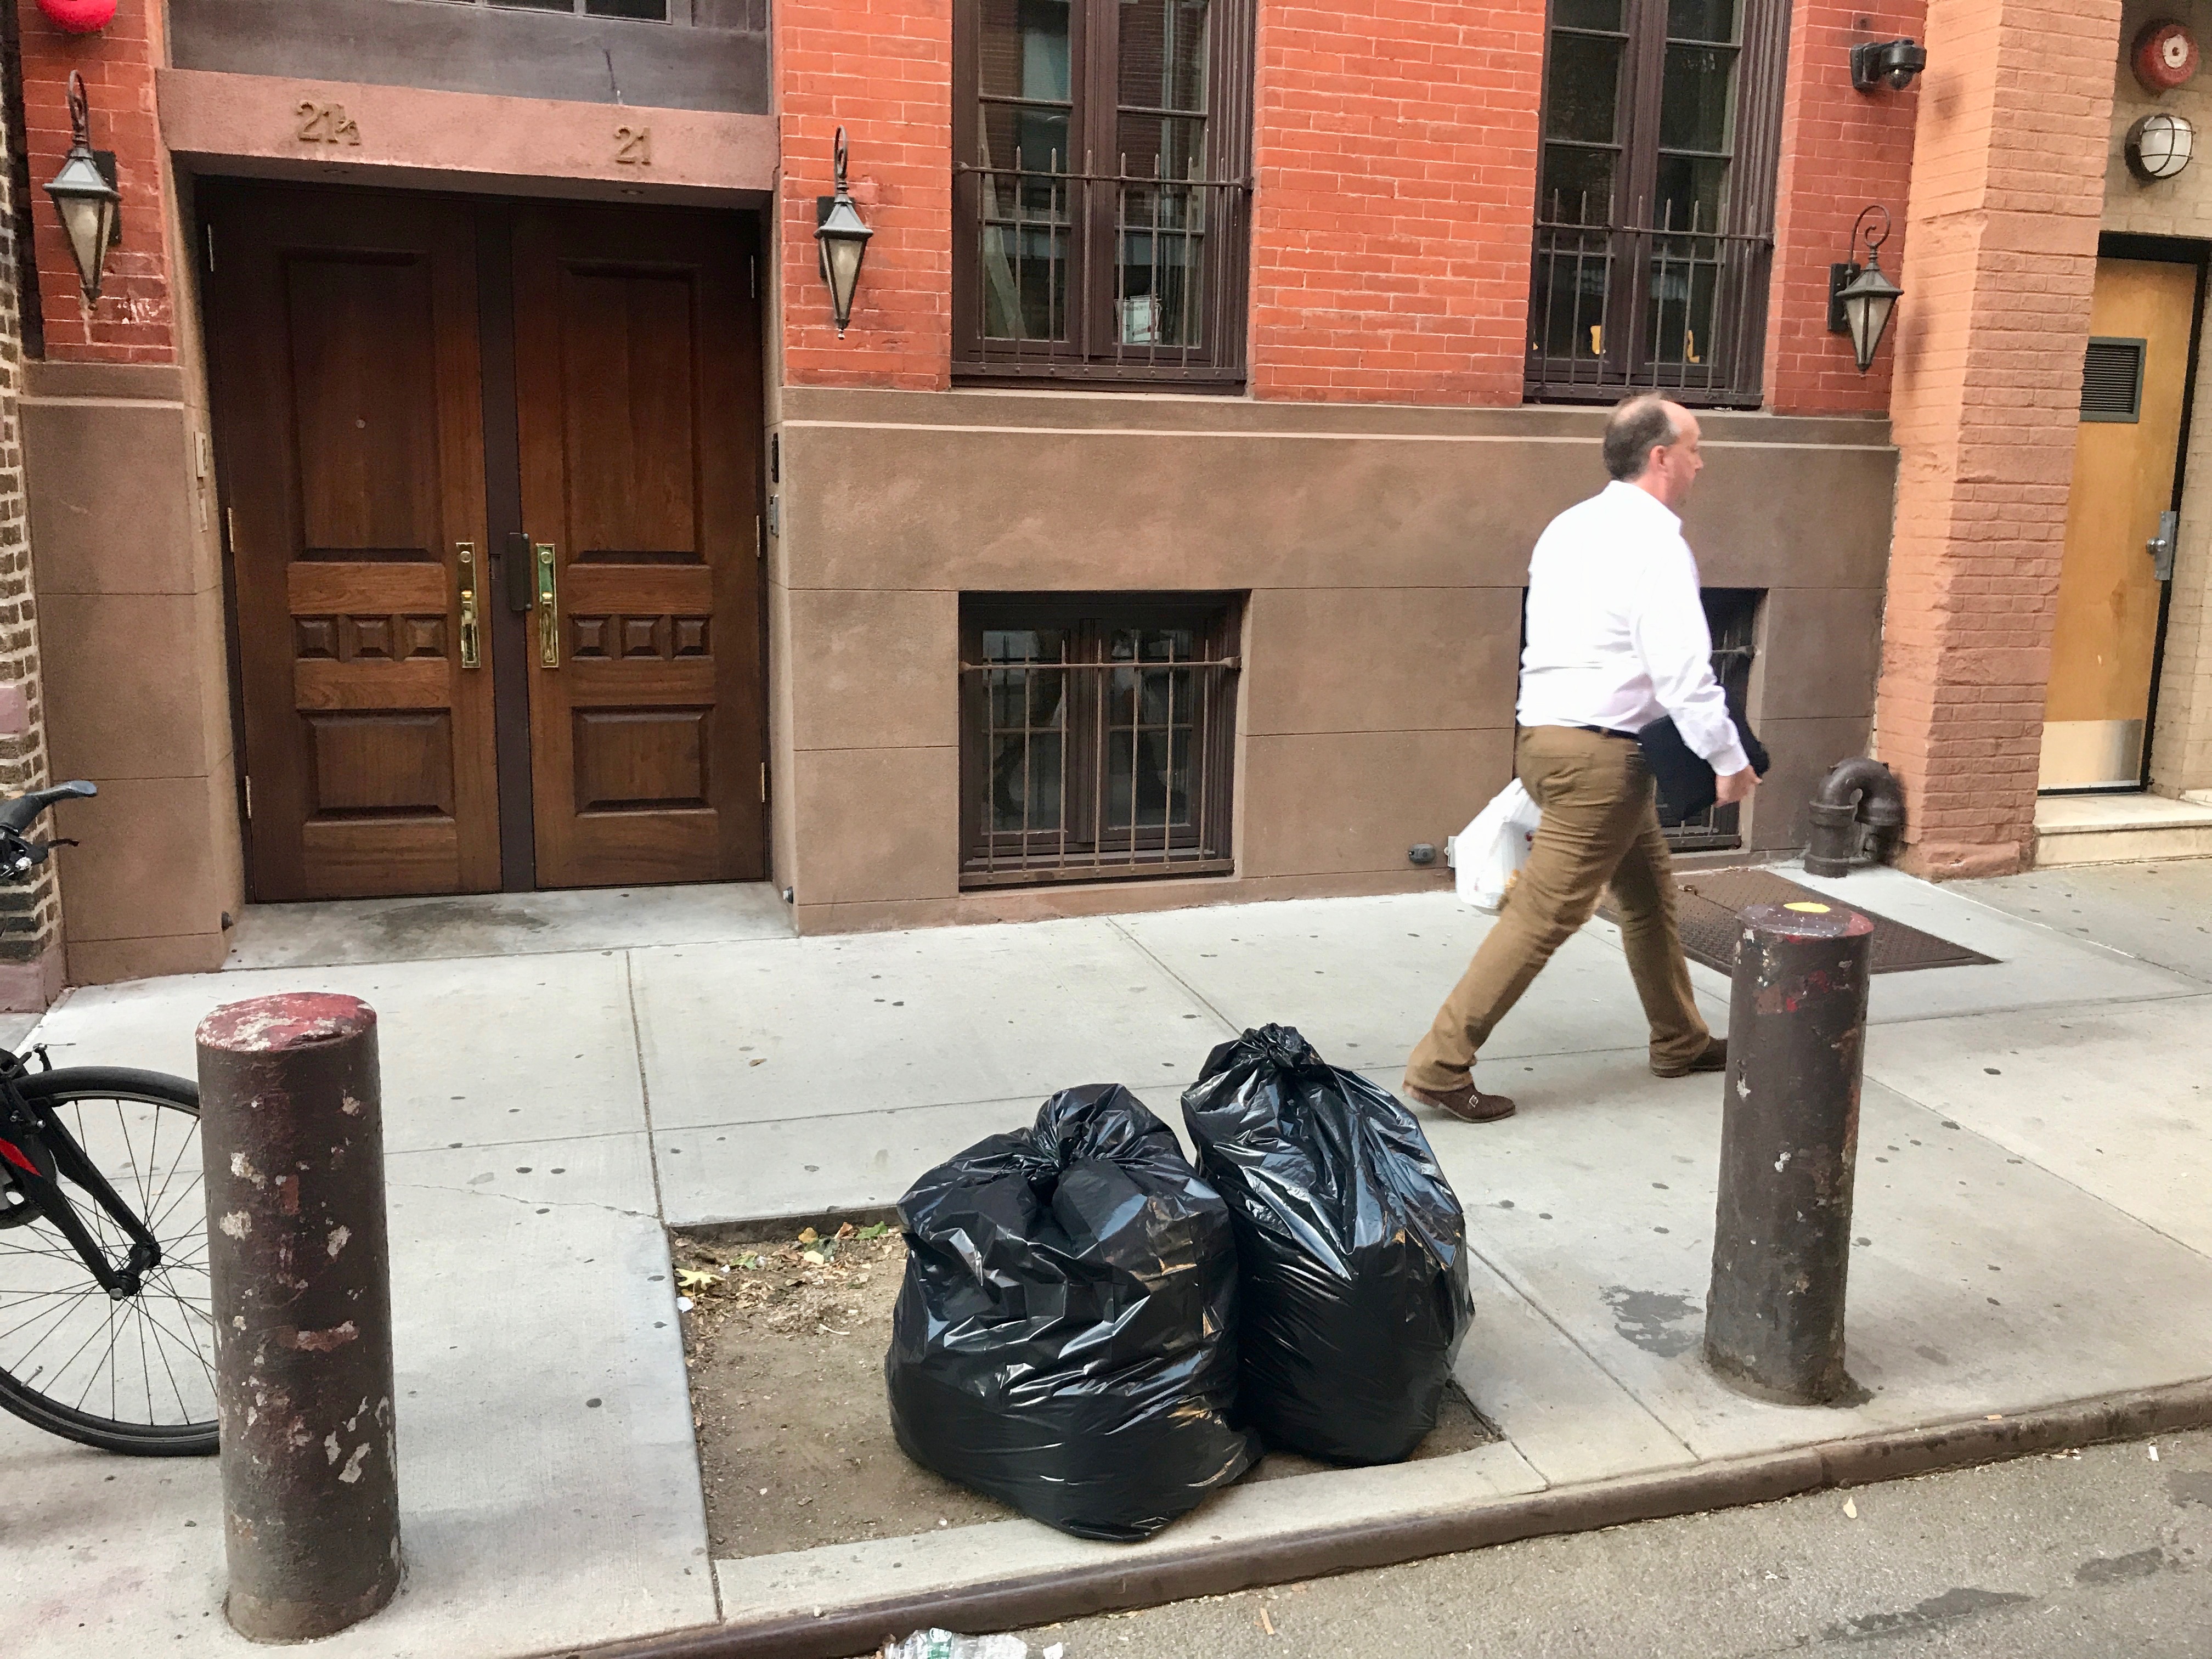 On a recent afternoon the treet pit at 21 Cornelia St was filled with garbage bags Photo by Gabe Herman